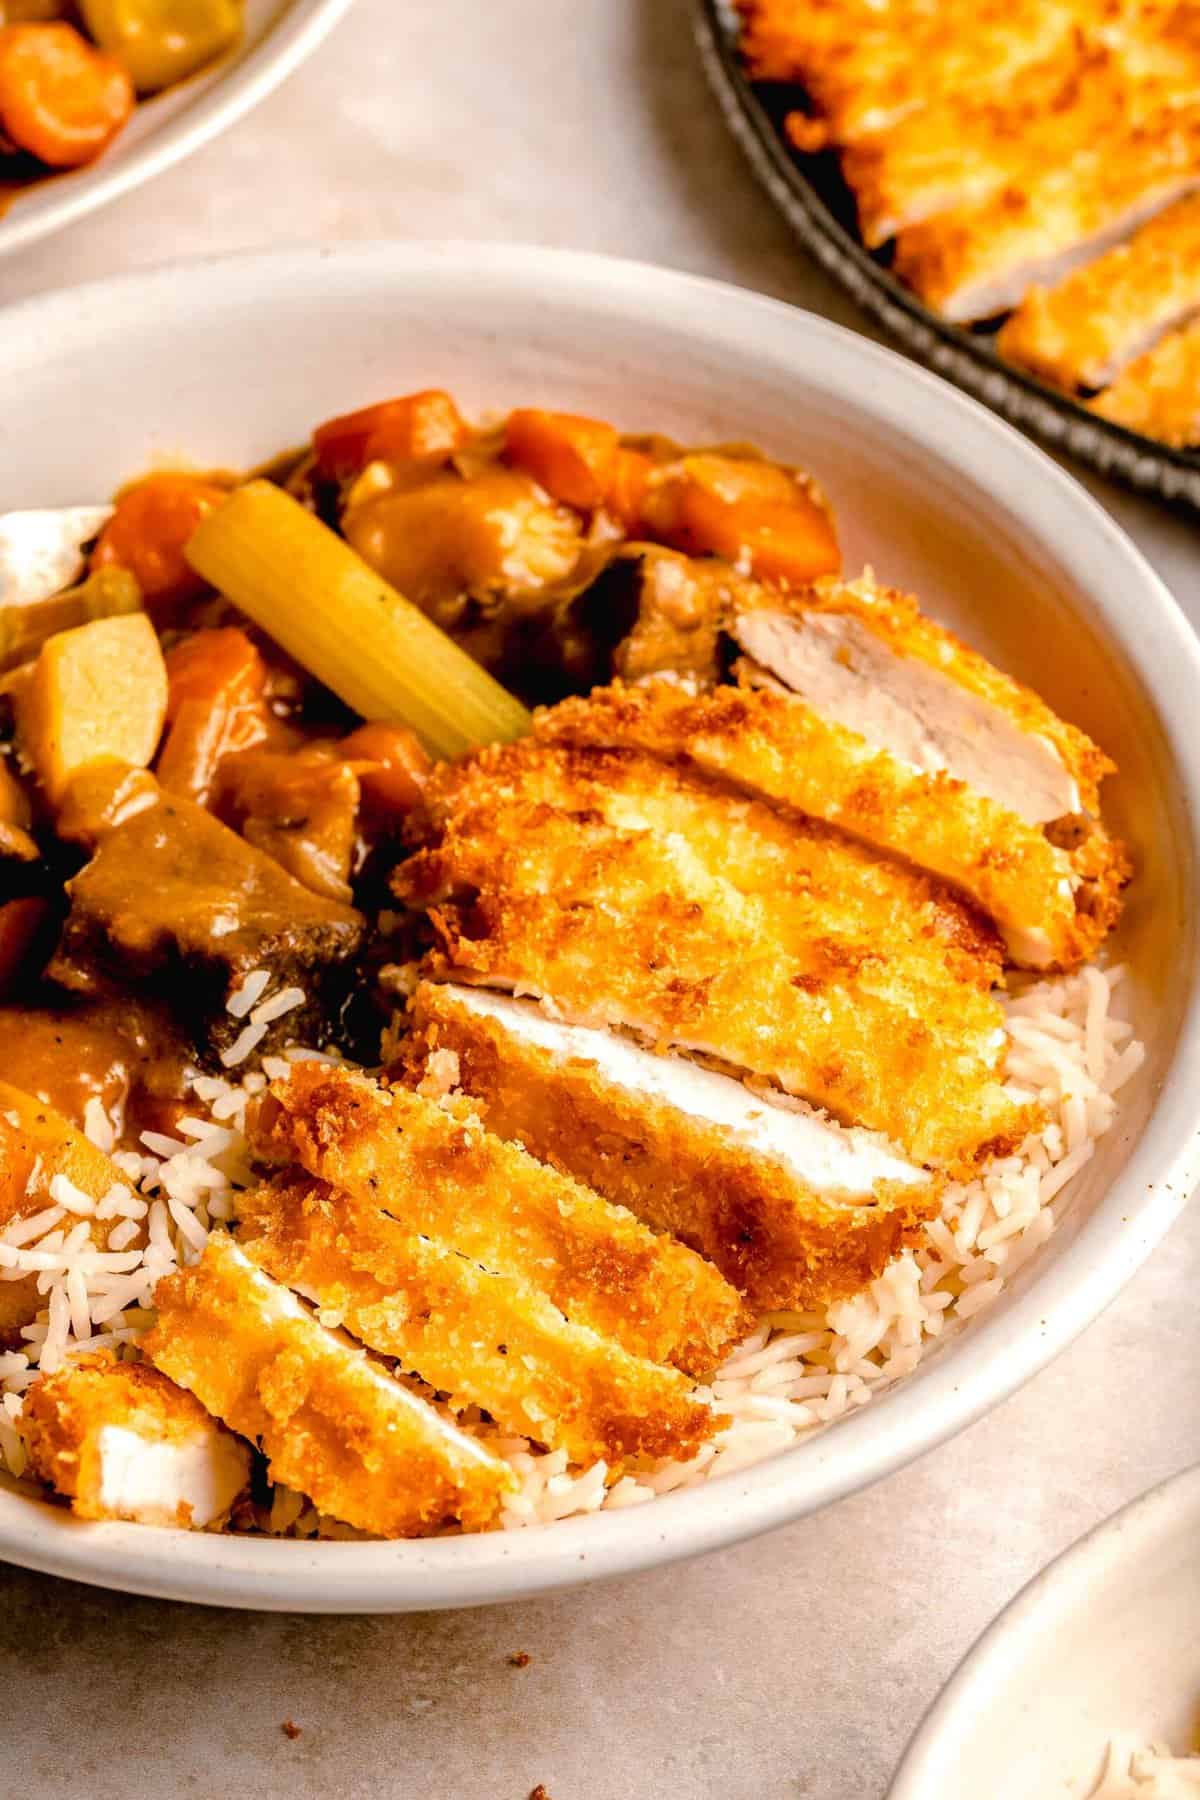 Katsu chicken curry served in a bowl over rice near a plate of chicken katsu and a bowl of curry.